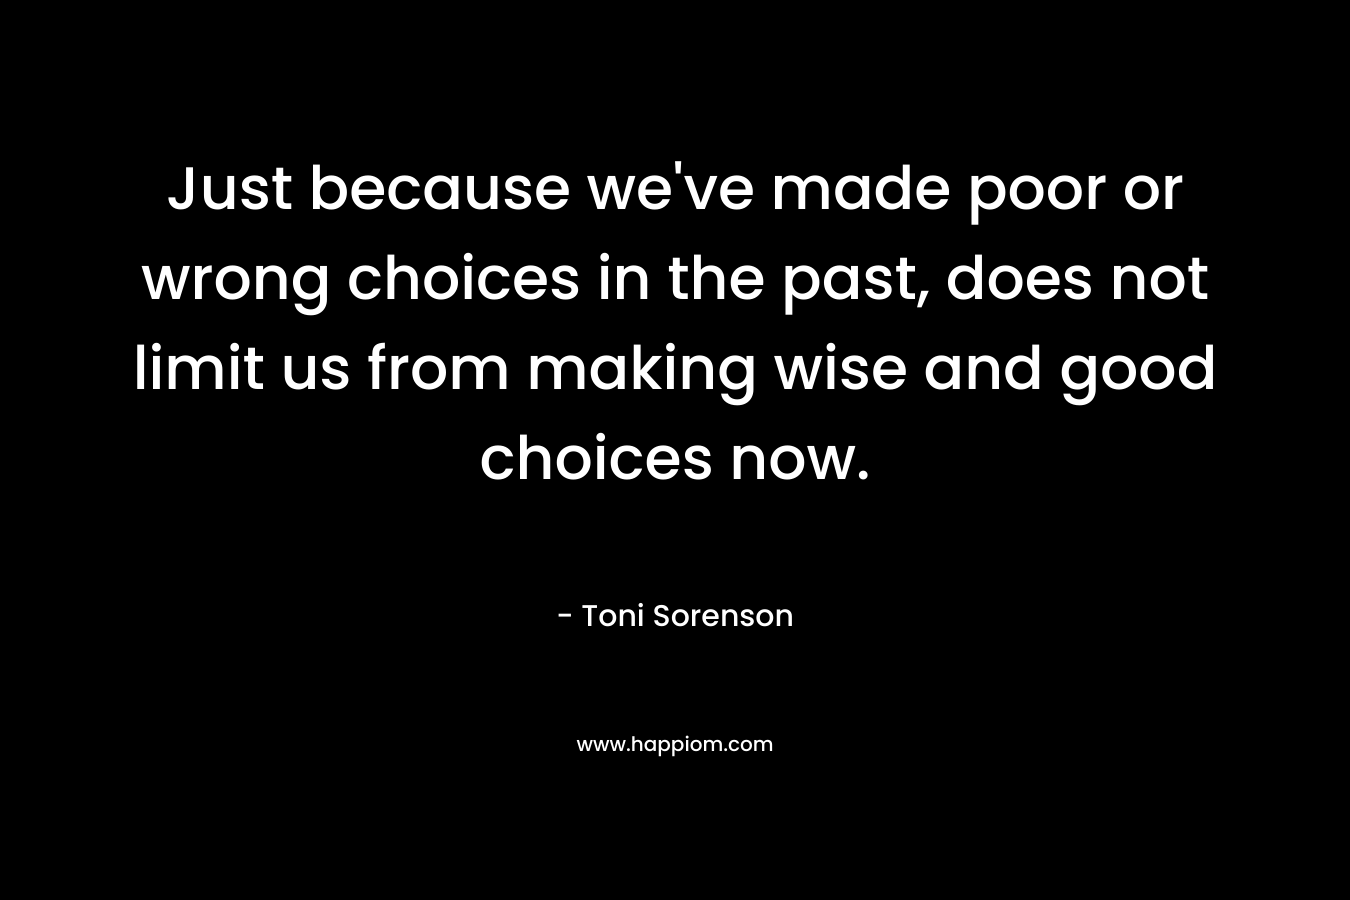 Just because we've made poor or wrong choices in the past, does not limit us from making wise and good choices now.